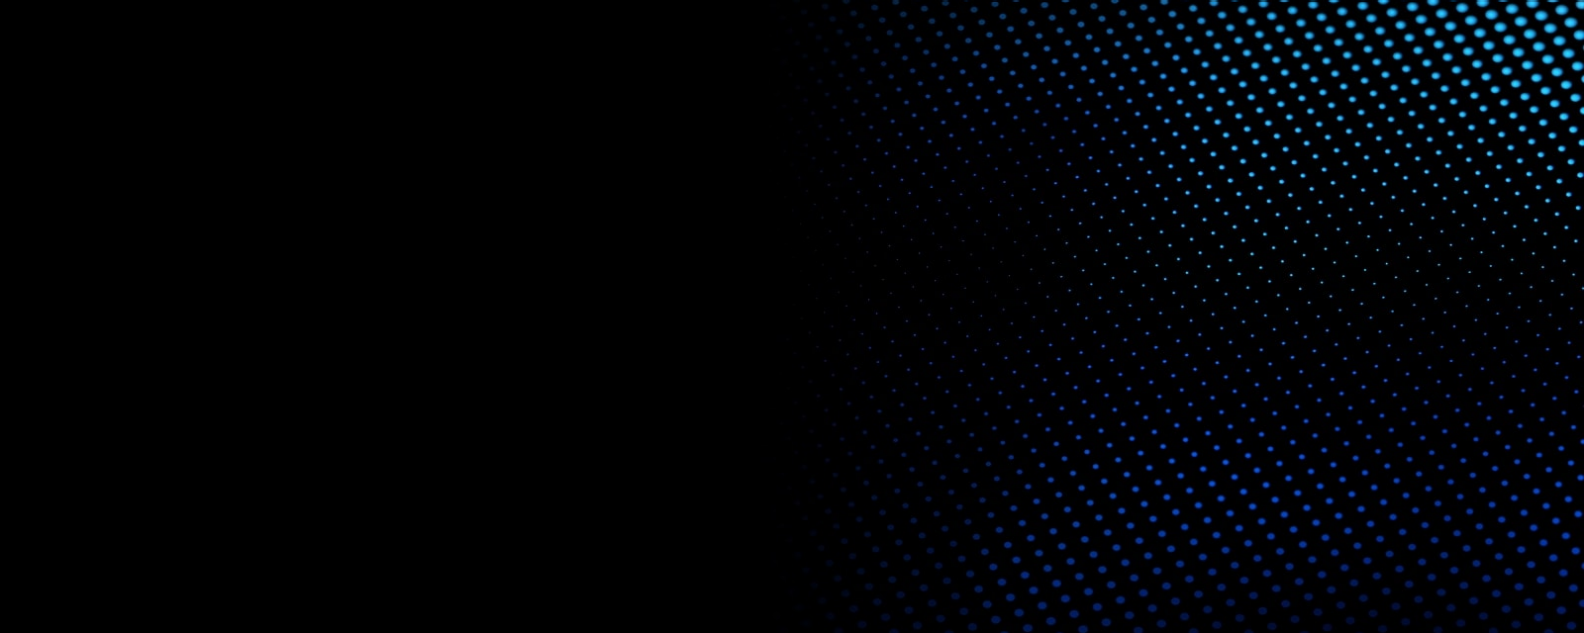 a black background with little blue circles